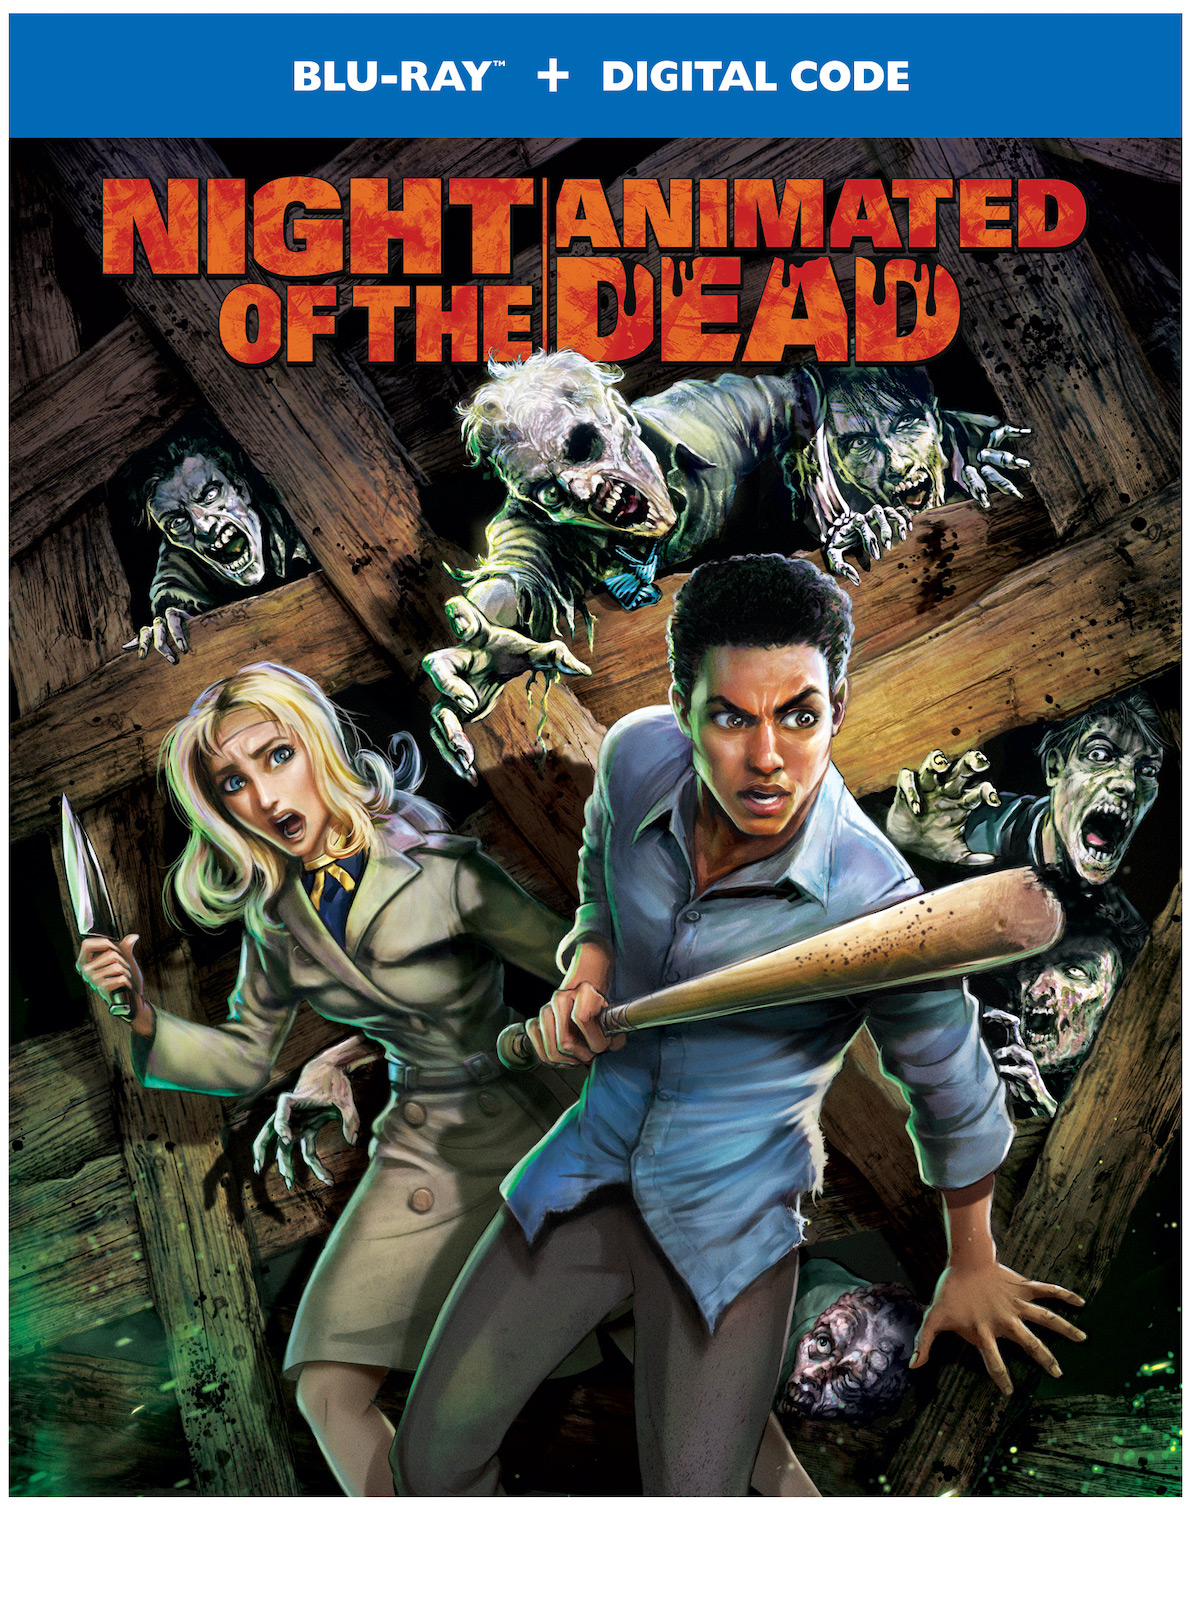 Night of the Animated Dead affiche film